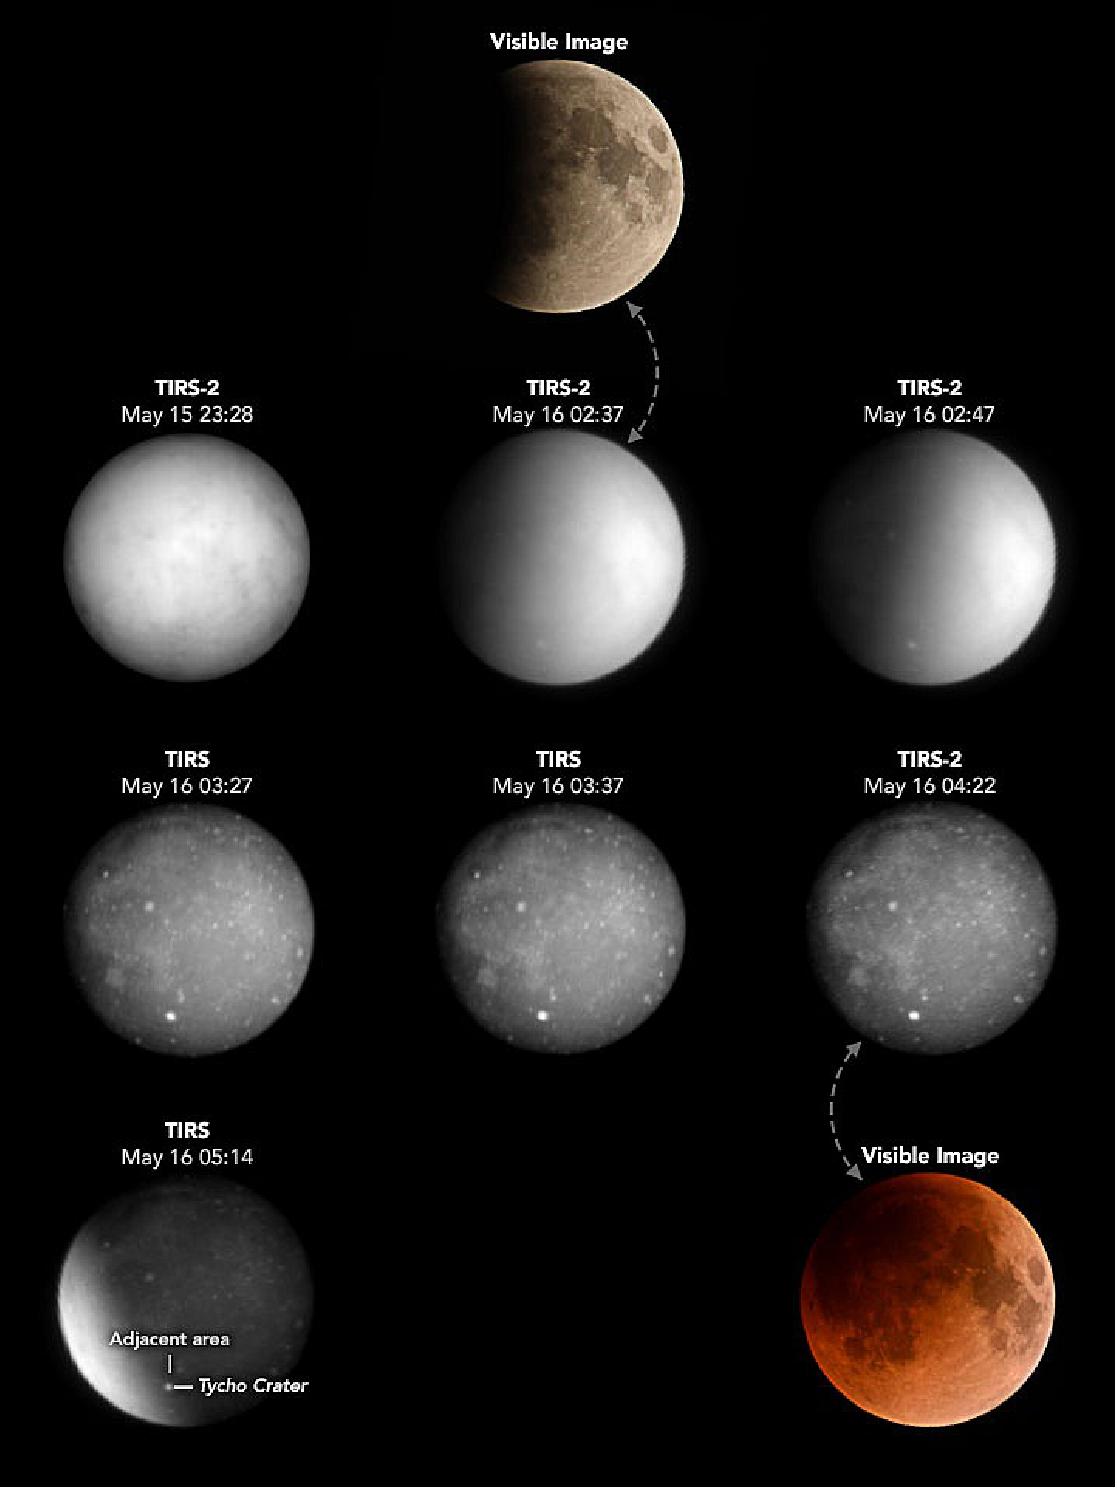 Figure 19: The changes are shown this series of images, derived from the Thermal Infrared Sensor (TIRS) on the Landsat 8 satellite and TIRS-2 on Landsat 9. The images have a resolution of roughly 60 kilometers per pixel. Note that the contrast in each image has been adjusted based on the minimum and maximum temperatures of the lunar surface in each scene (image credit: NASA Earth Observatory images by Joshua Stevens, using Landsat data from the U.S. Geological Survey and Matthew Montanaro/GSFC/RIT. Visible images (Nikon DSLR photographs) by Matthew Montanaro/GSFC/RIT. Story by Kathryn Hansen)